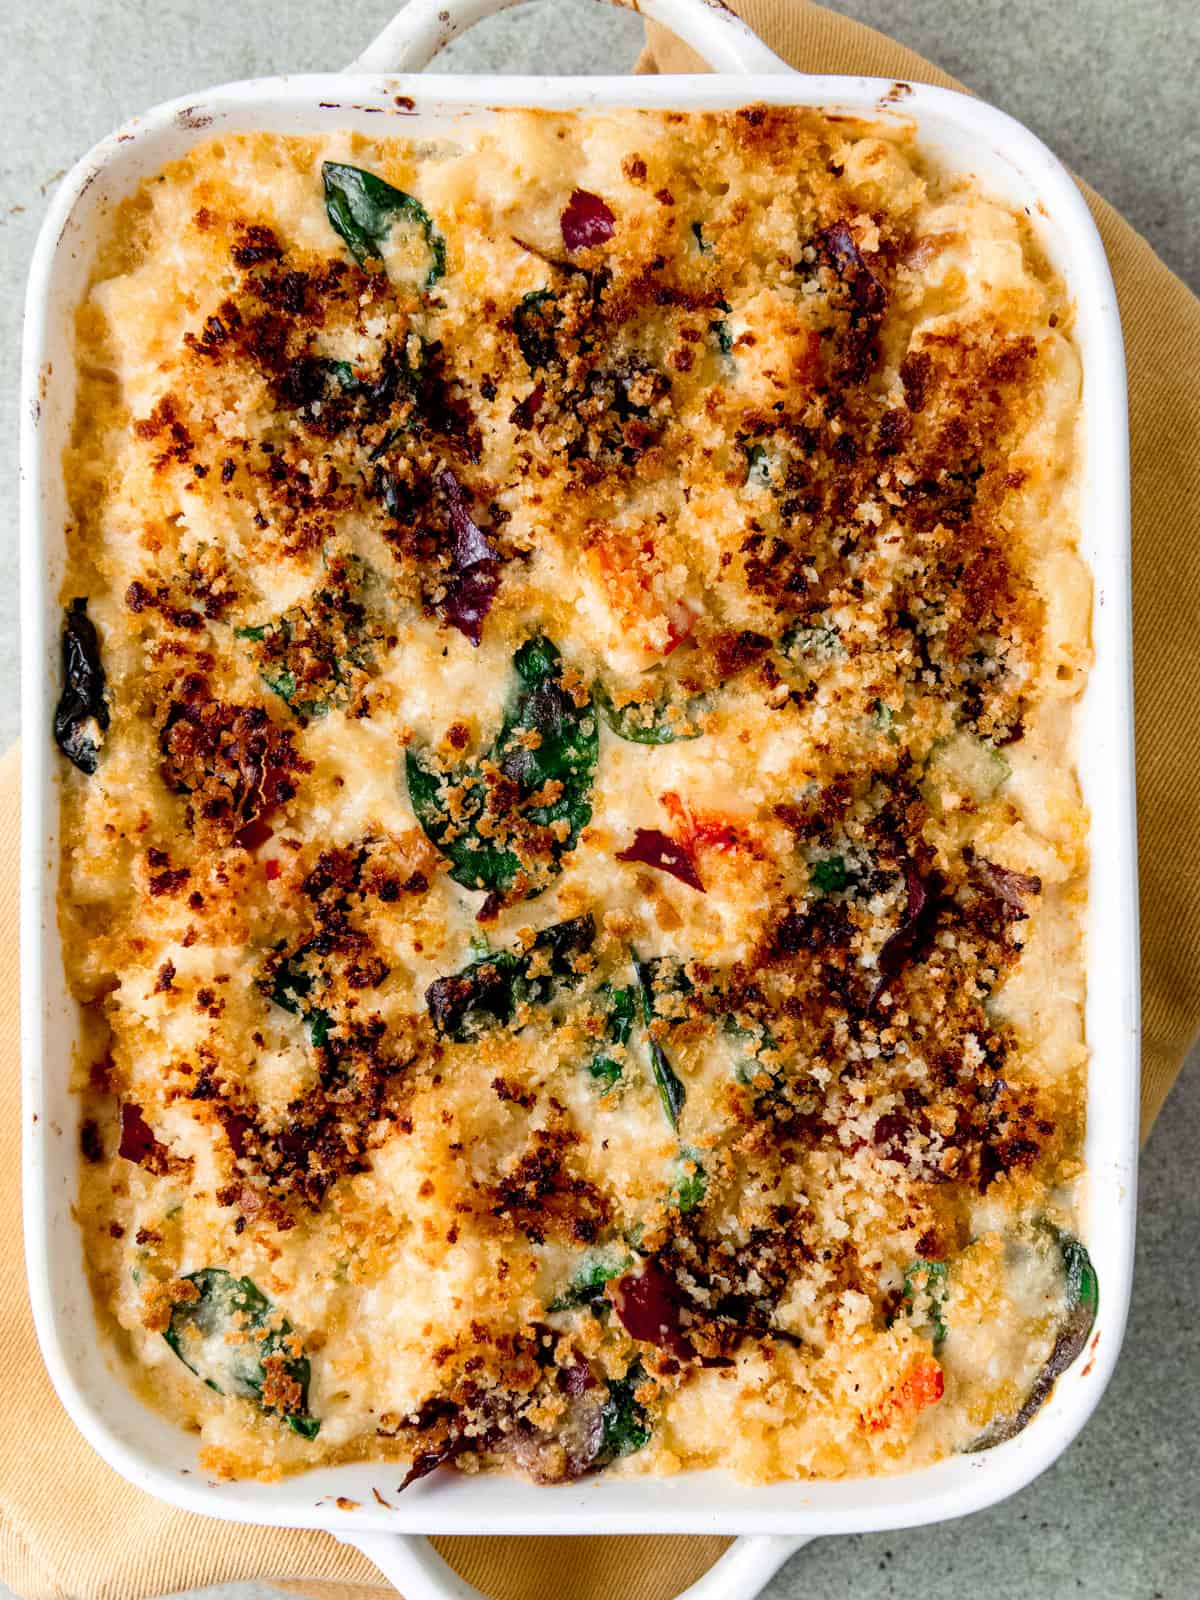 Lobster mac and cheese with prosciutto and spinach.